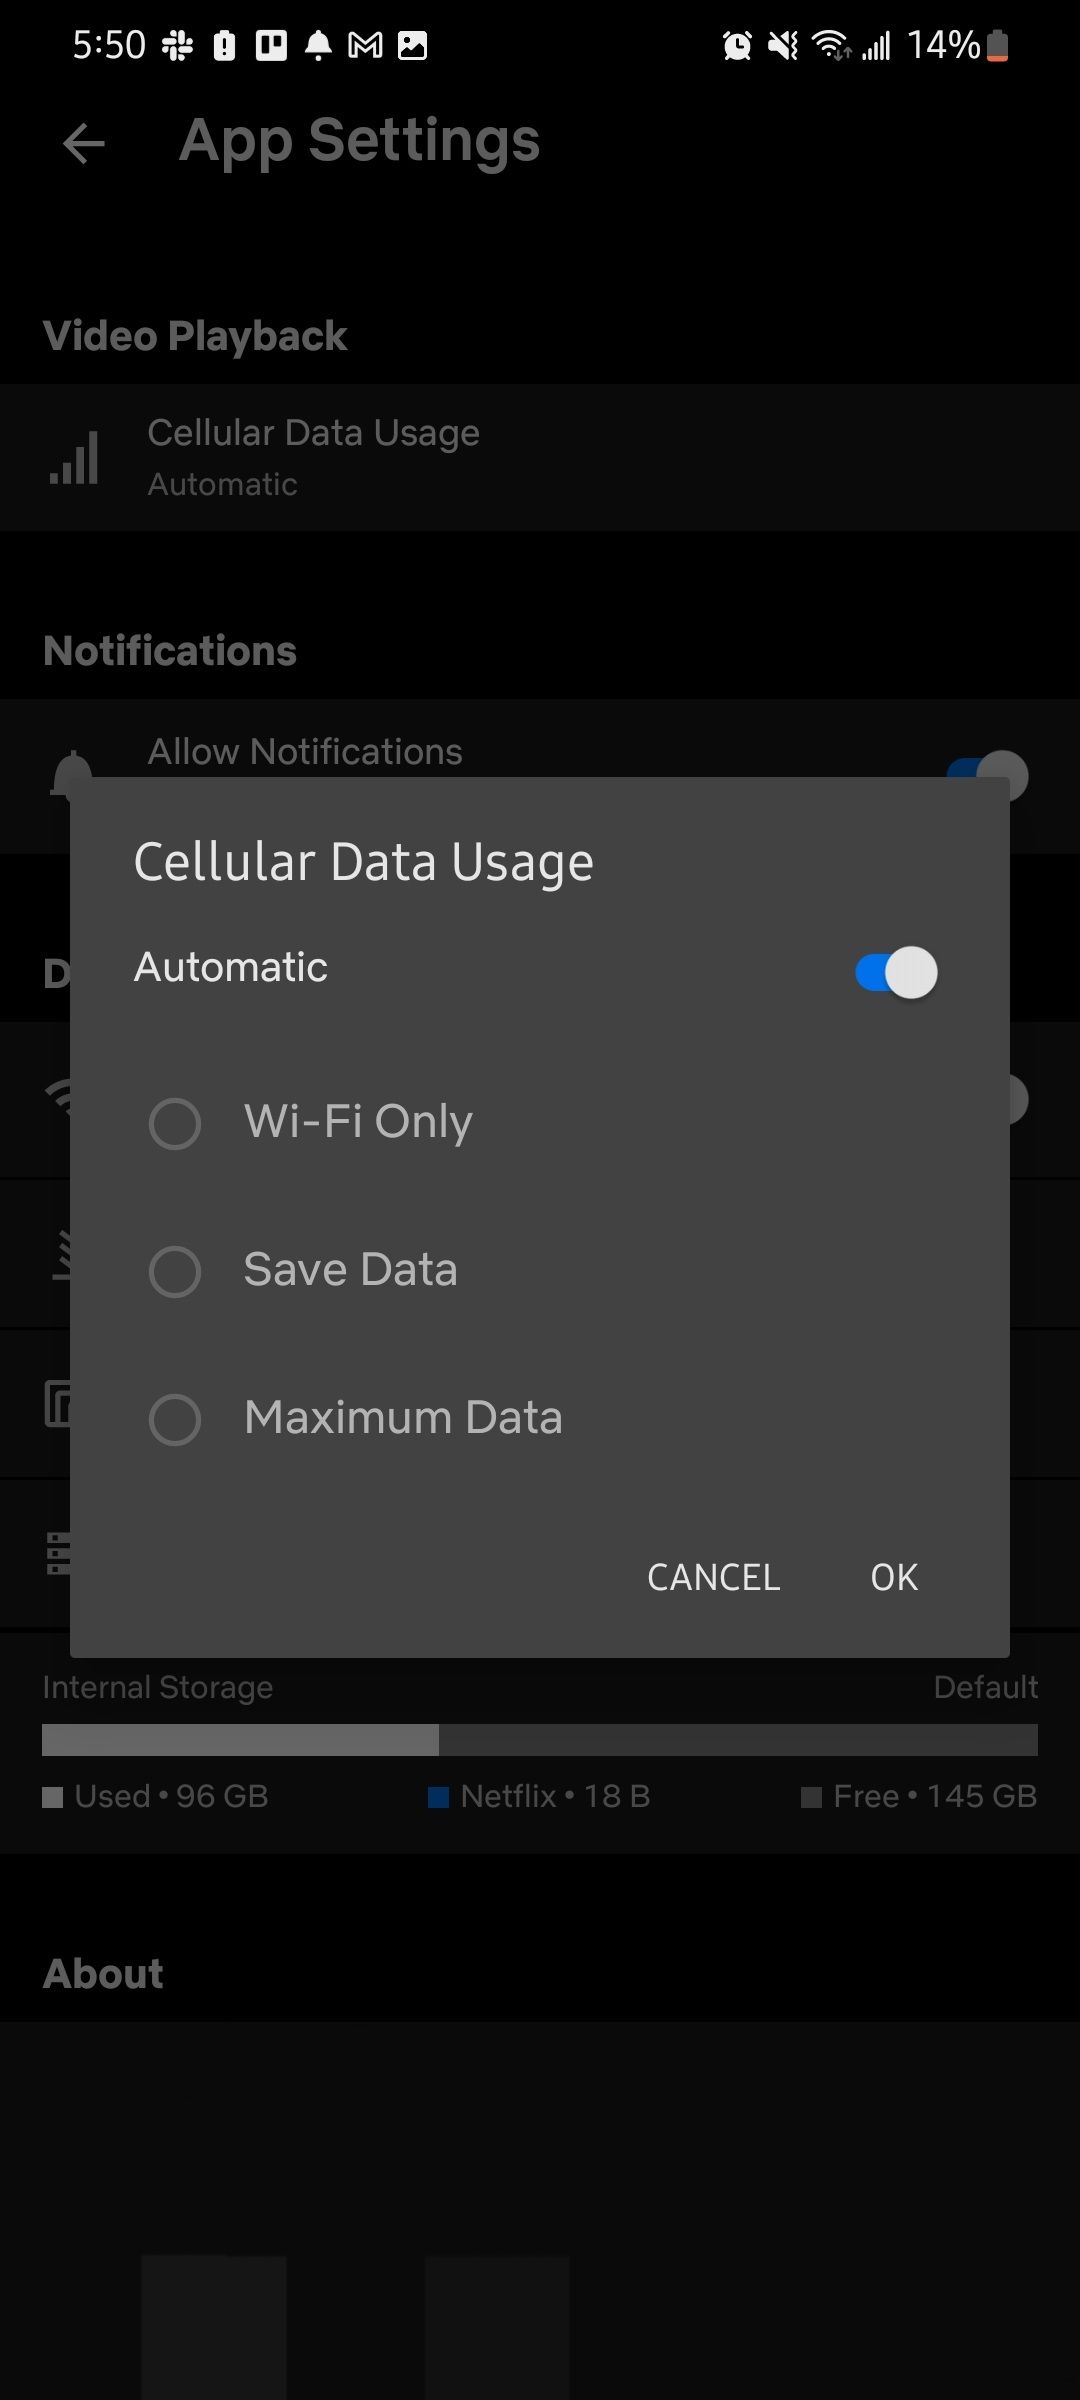 cellular data usage settings in netflix mobile app